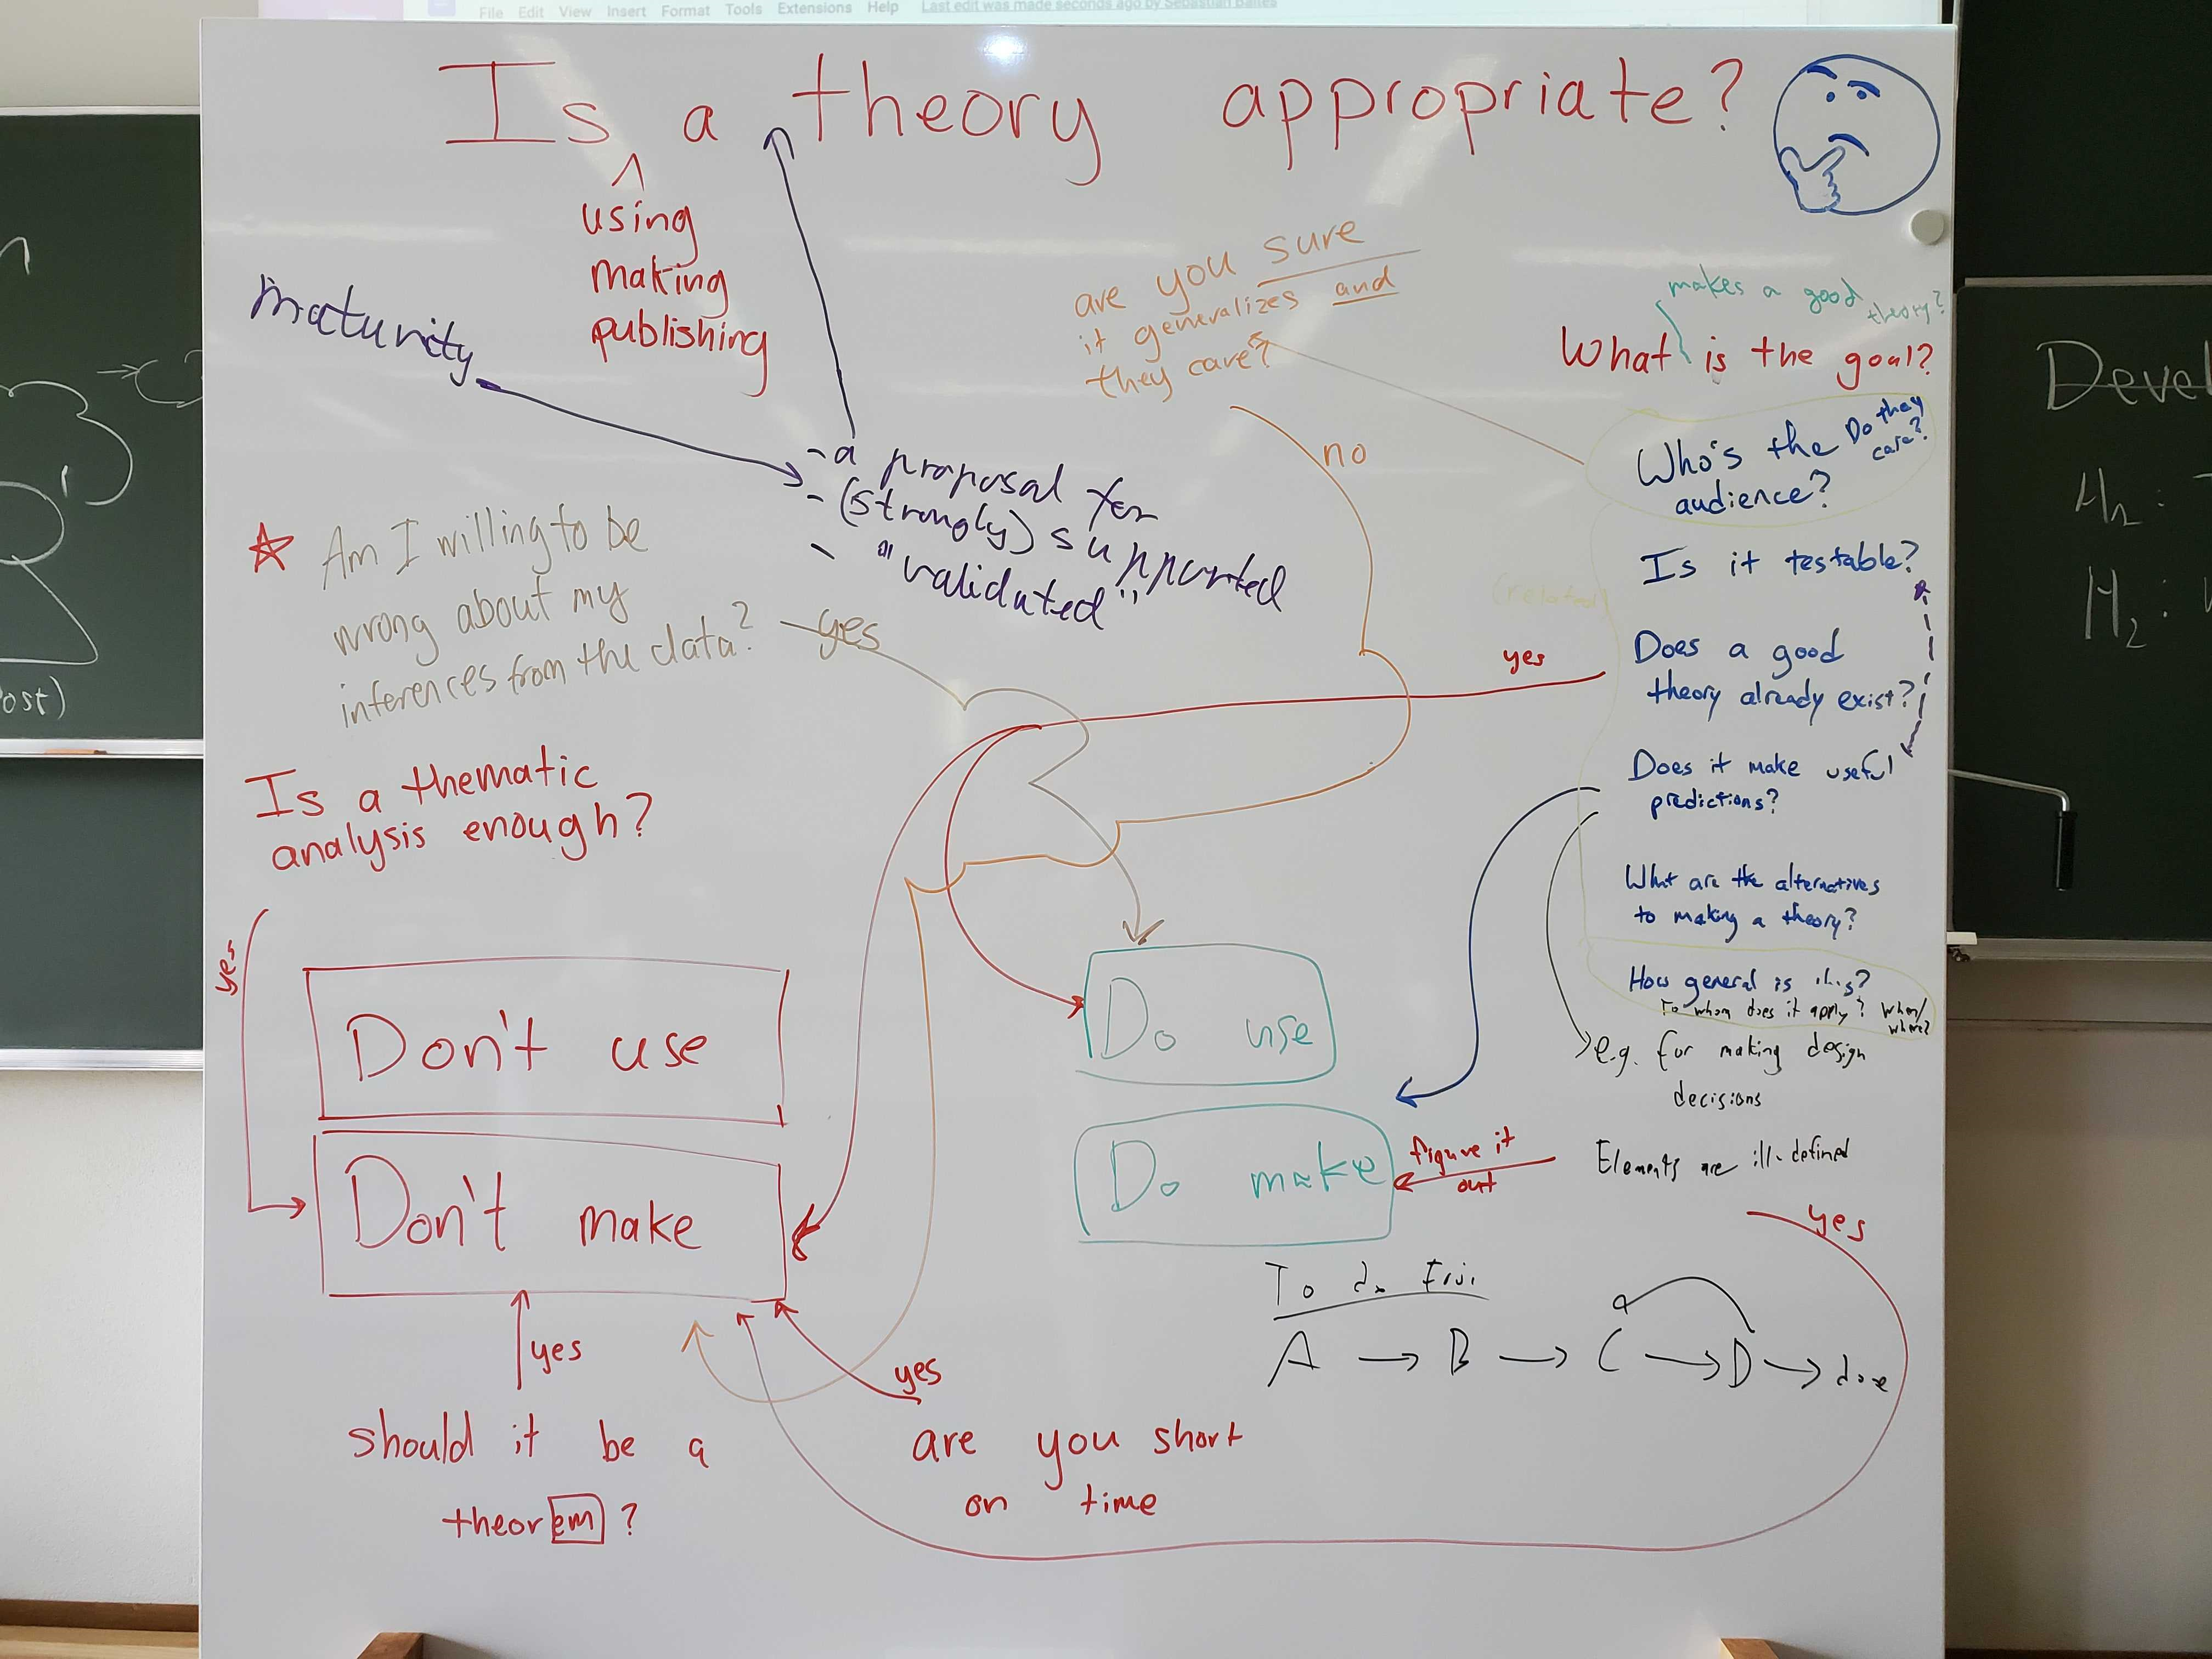 Whiteboard sketch of flowchart considering whether a theory is appropriate.